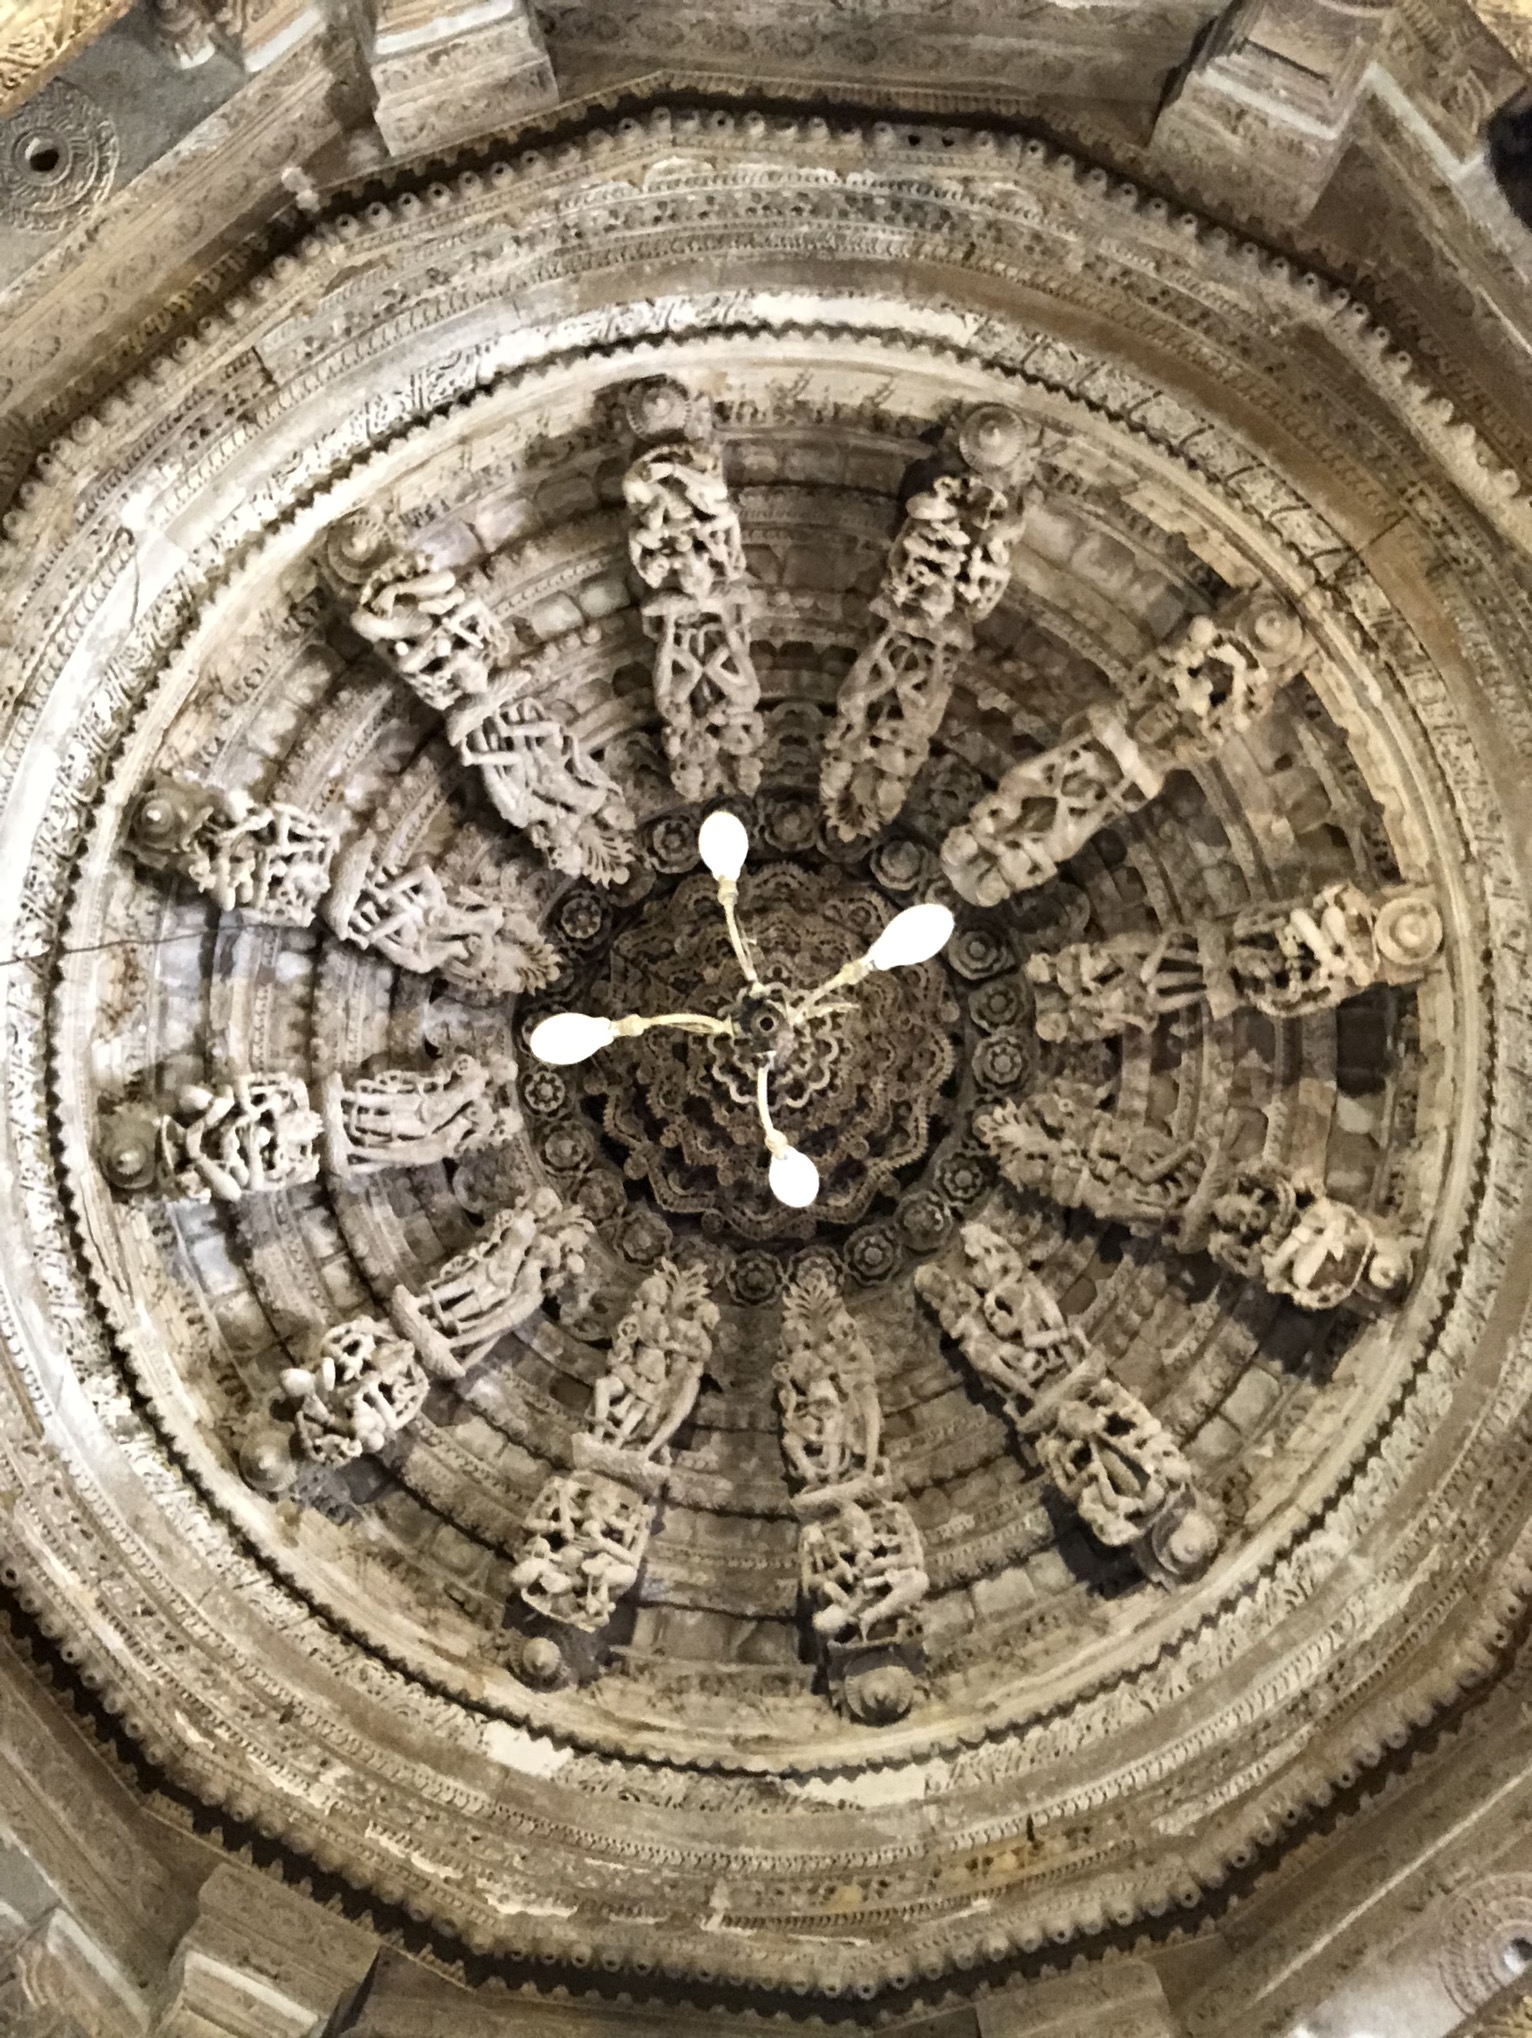 This image shows the intricately carved ceiling of an ancient temple. The circular design features detailed stone sculptures radiating outwards, and a chandelier with white lights hangs from the center. The carvings depict various figures and patterns.